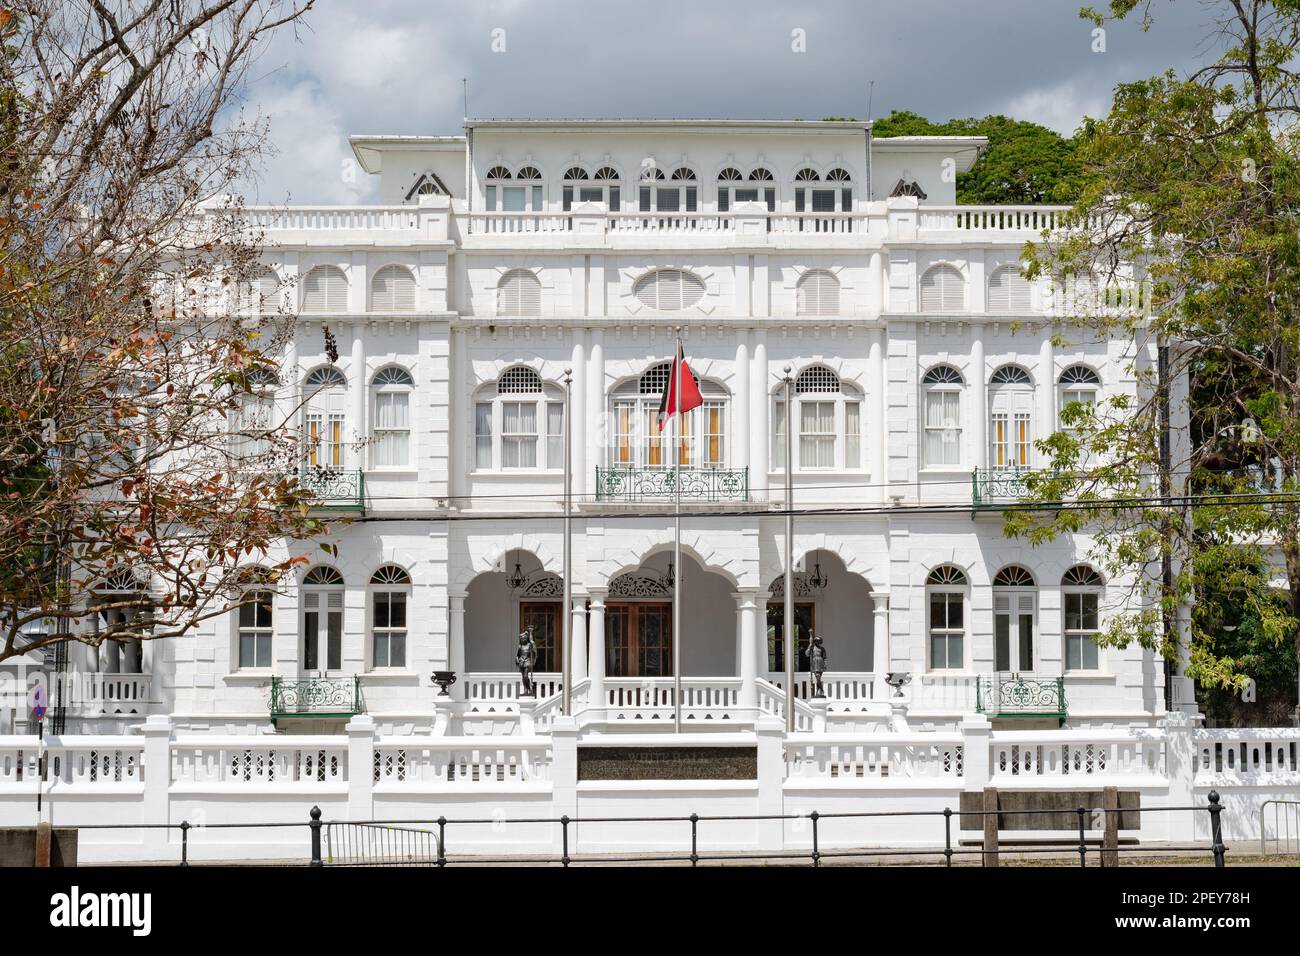 Old, Vintage architecture of the Whitehall building located in the row of the Magnificent Seven in Port of Spain, Trinidad. Stock Photo